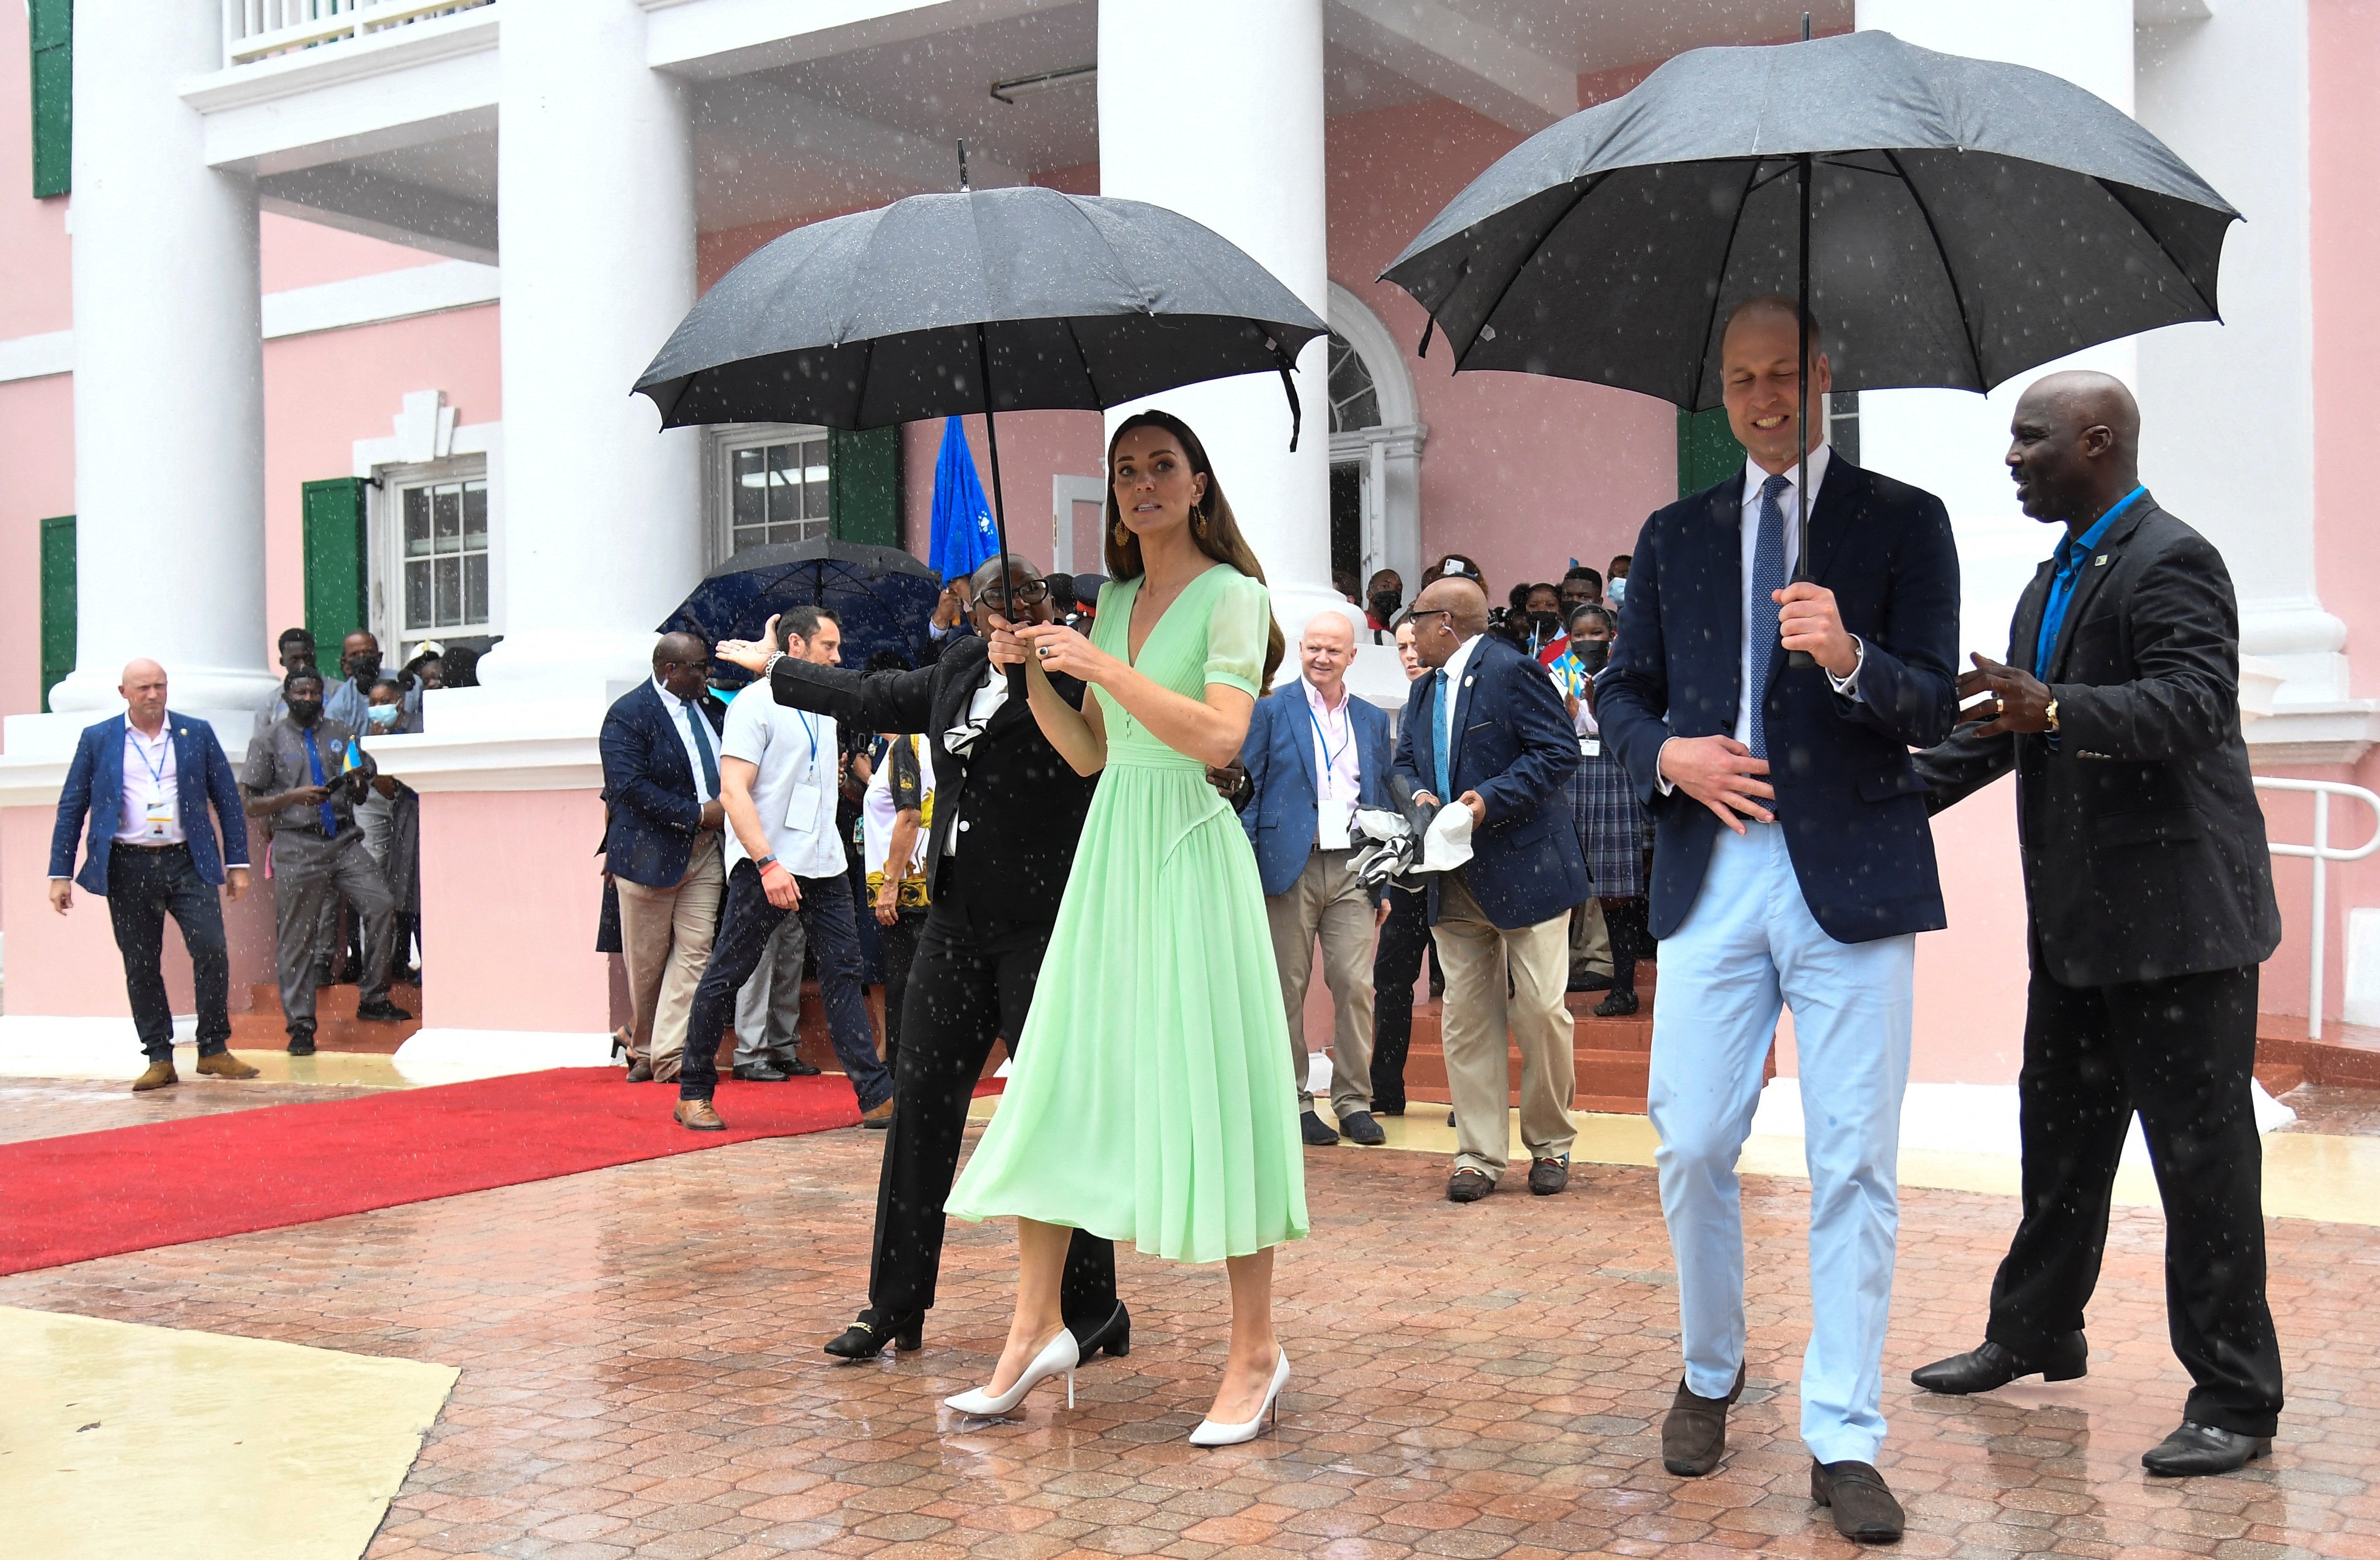 The Duke and Duchess of Cambridge go for a walkabout in the rain to meet locals in Nassau (Toby Melville/PA)